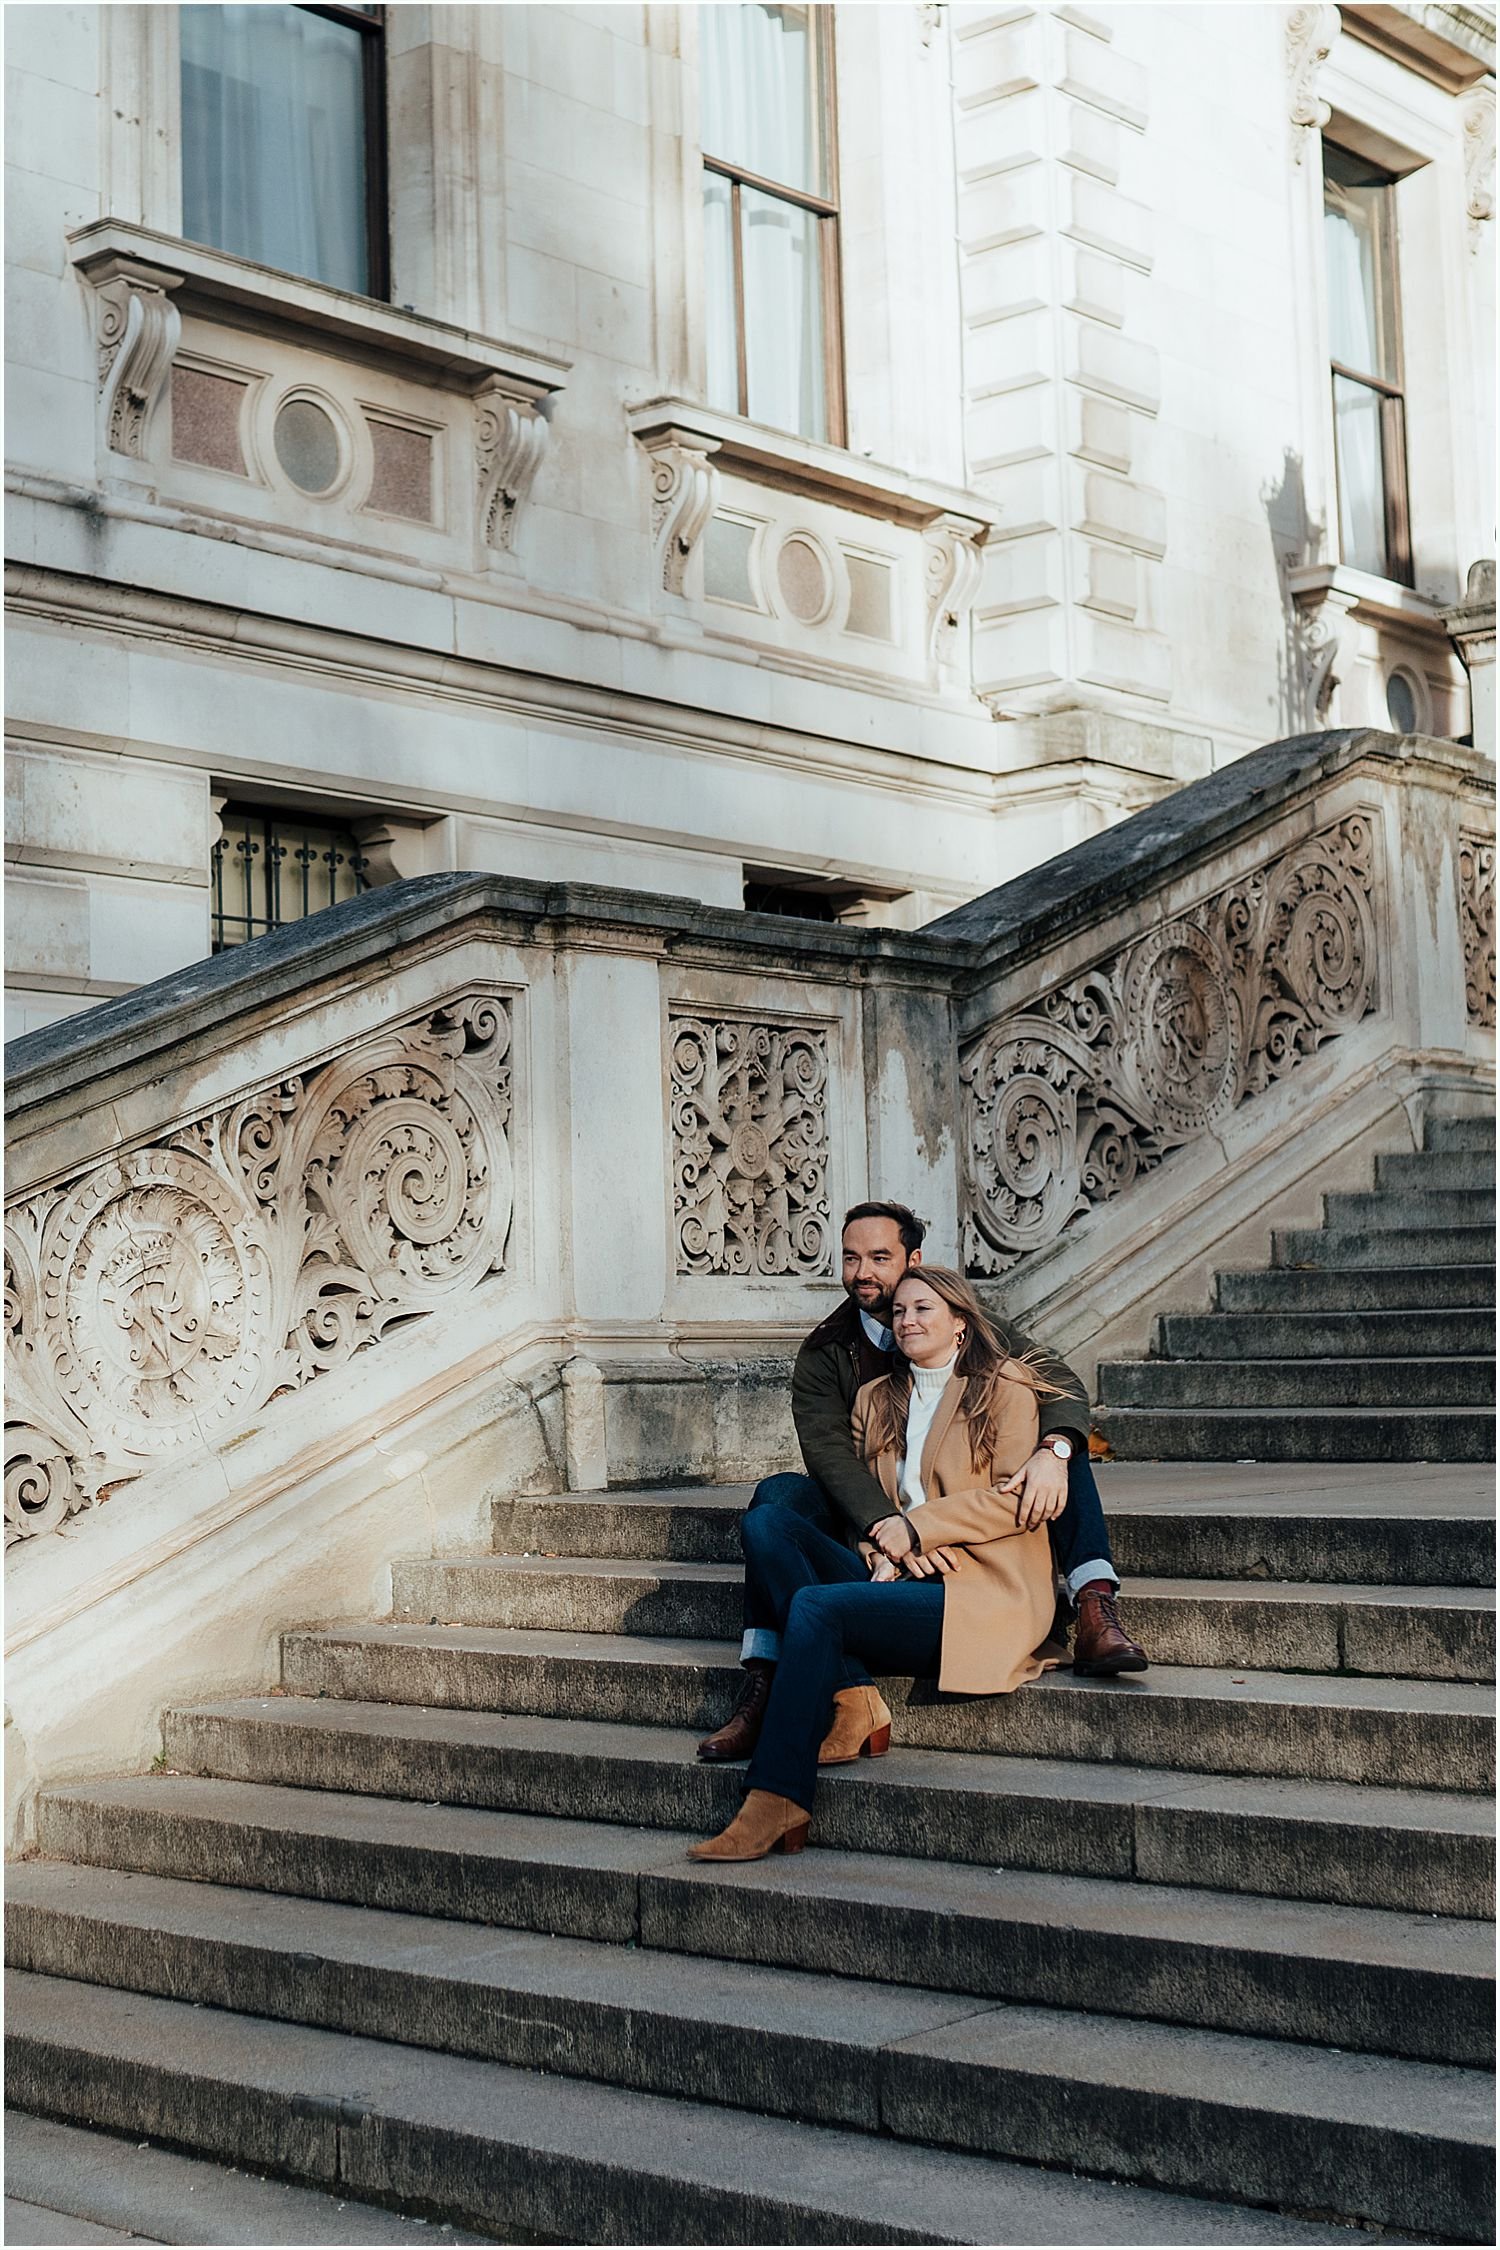 Couple sitting on steps in Westminster during photo shoot